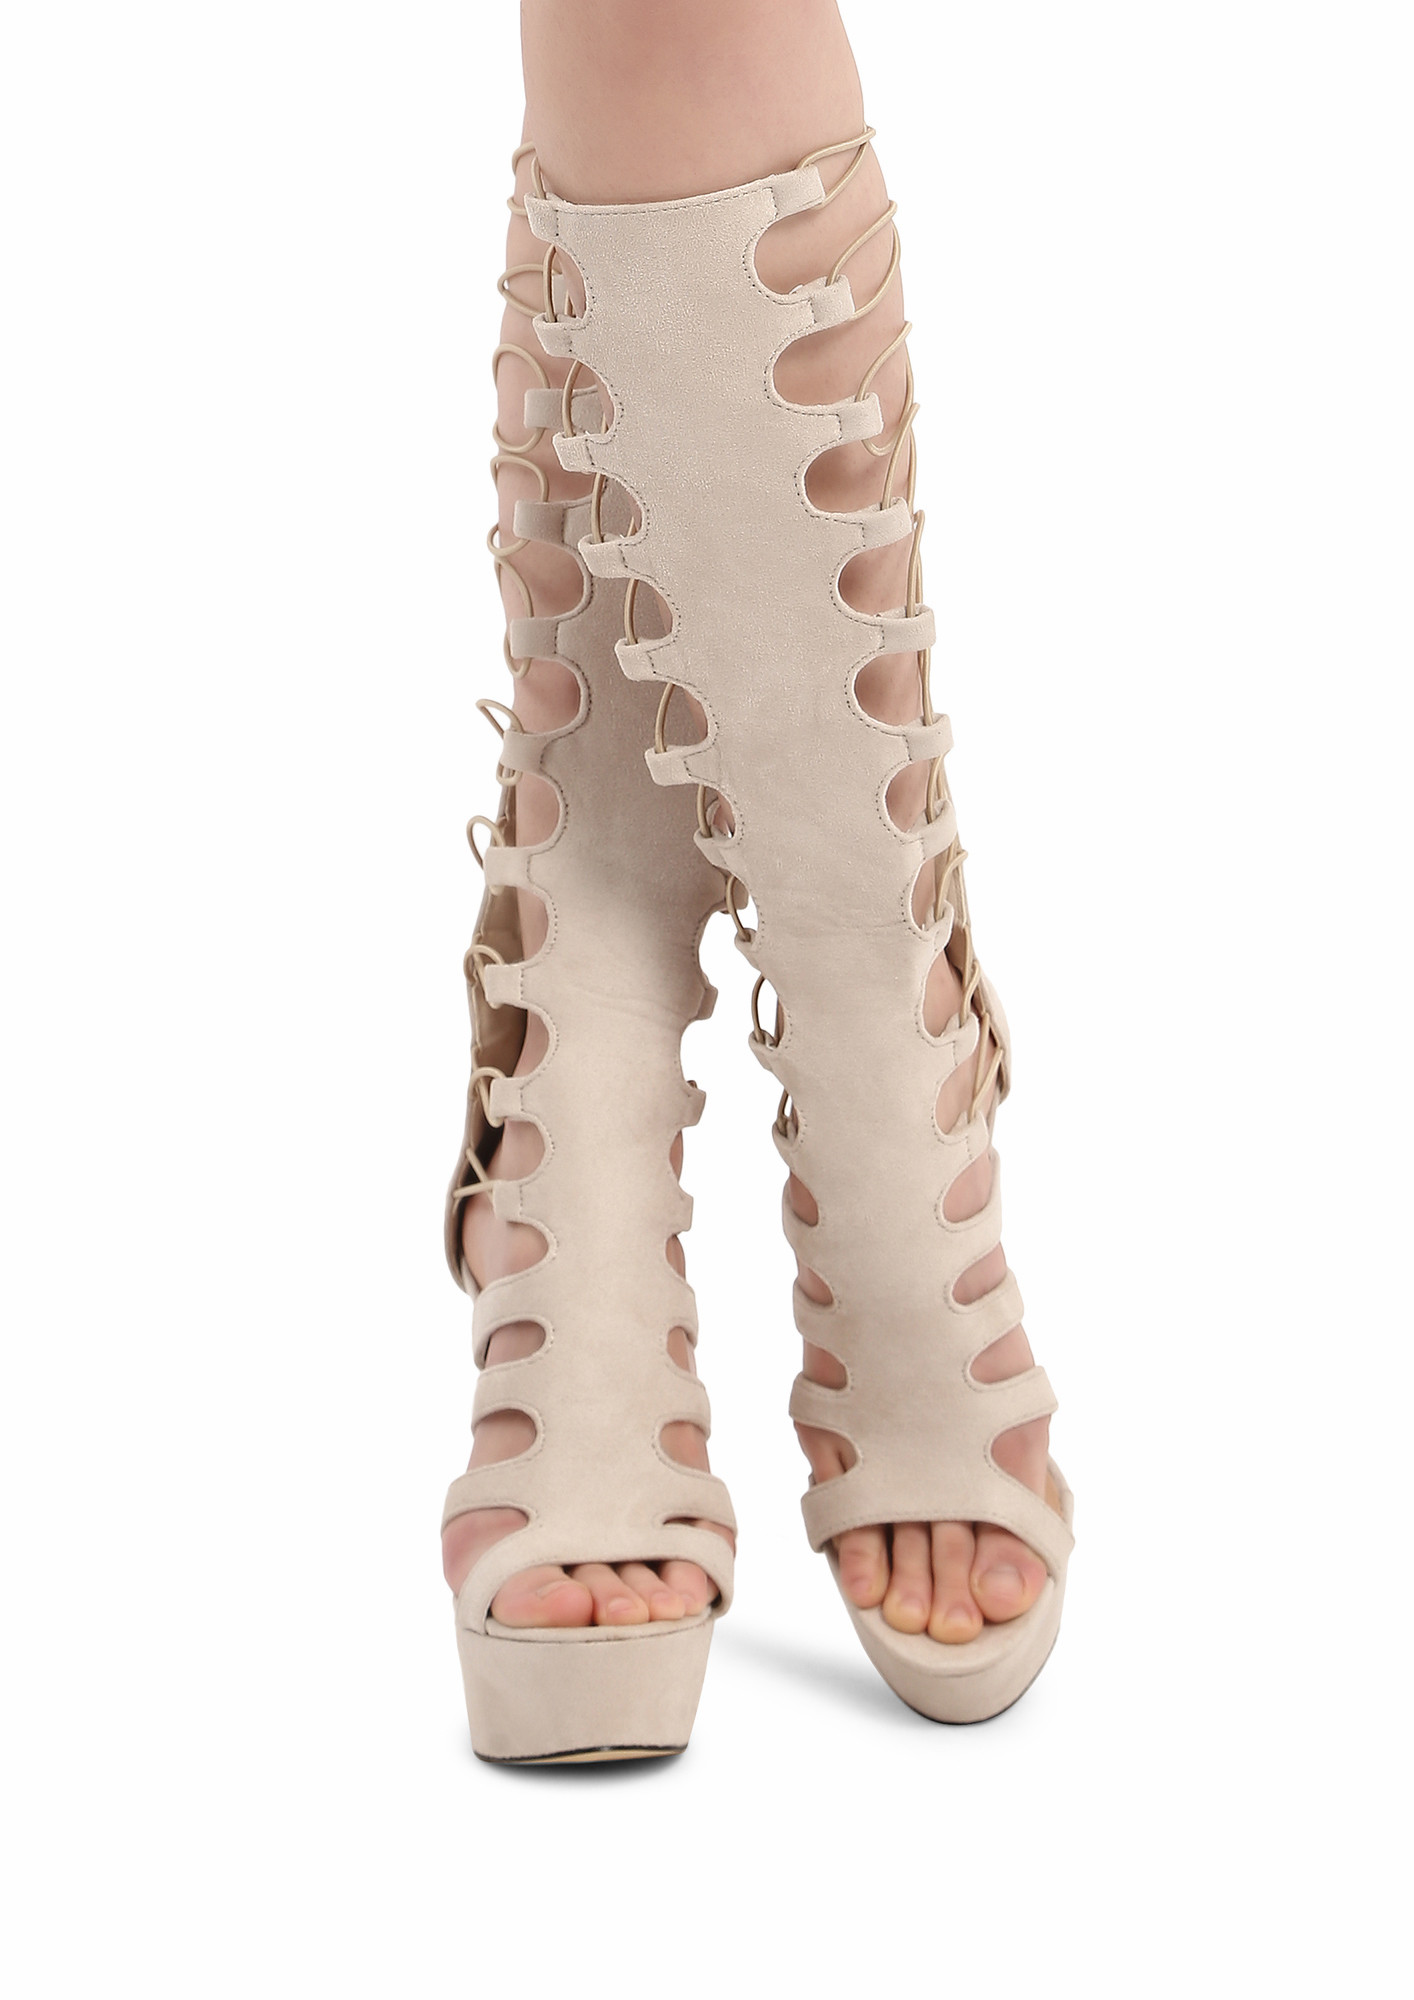 Womens Stiletto High Heels Gladiator Sandals Strappy Hollow Out Open Toe  Shoes | eBay